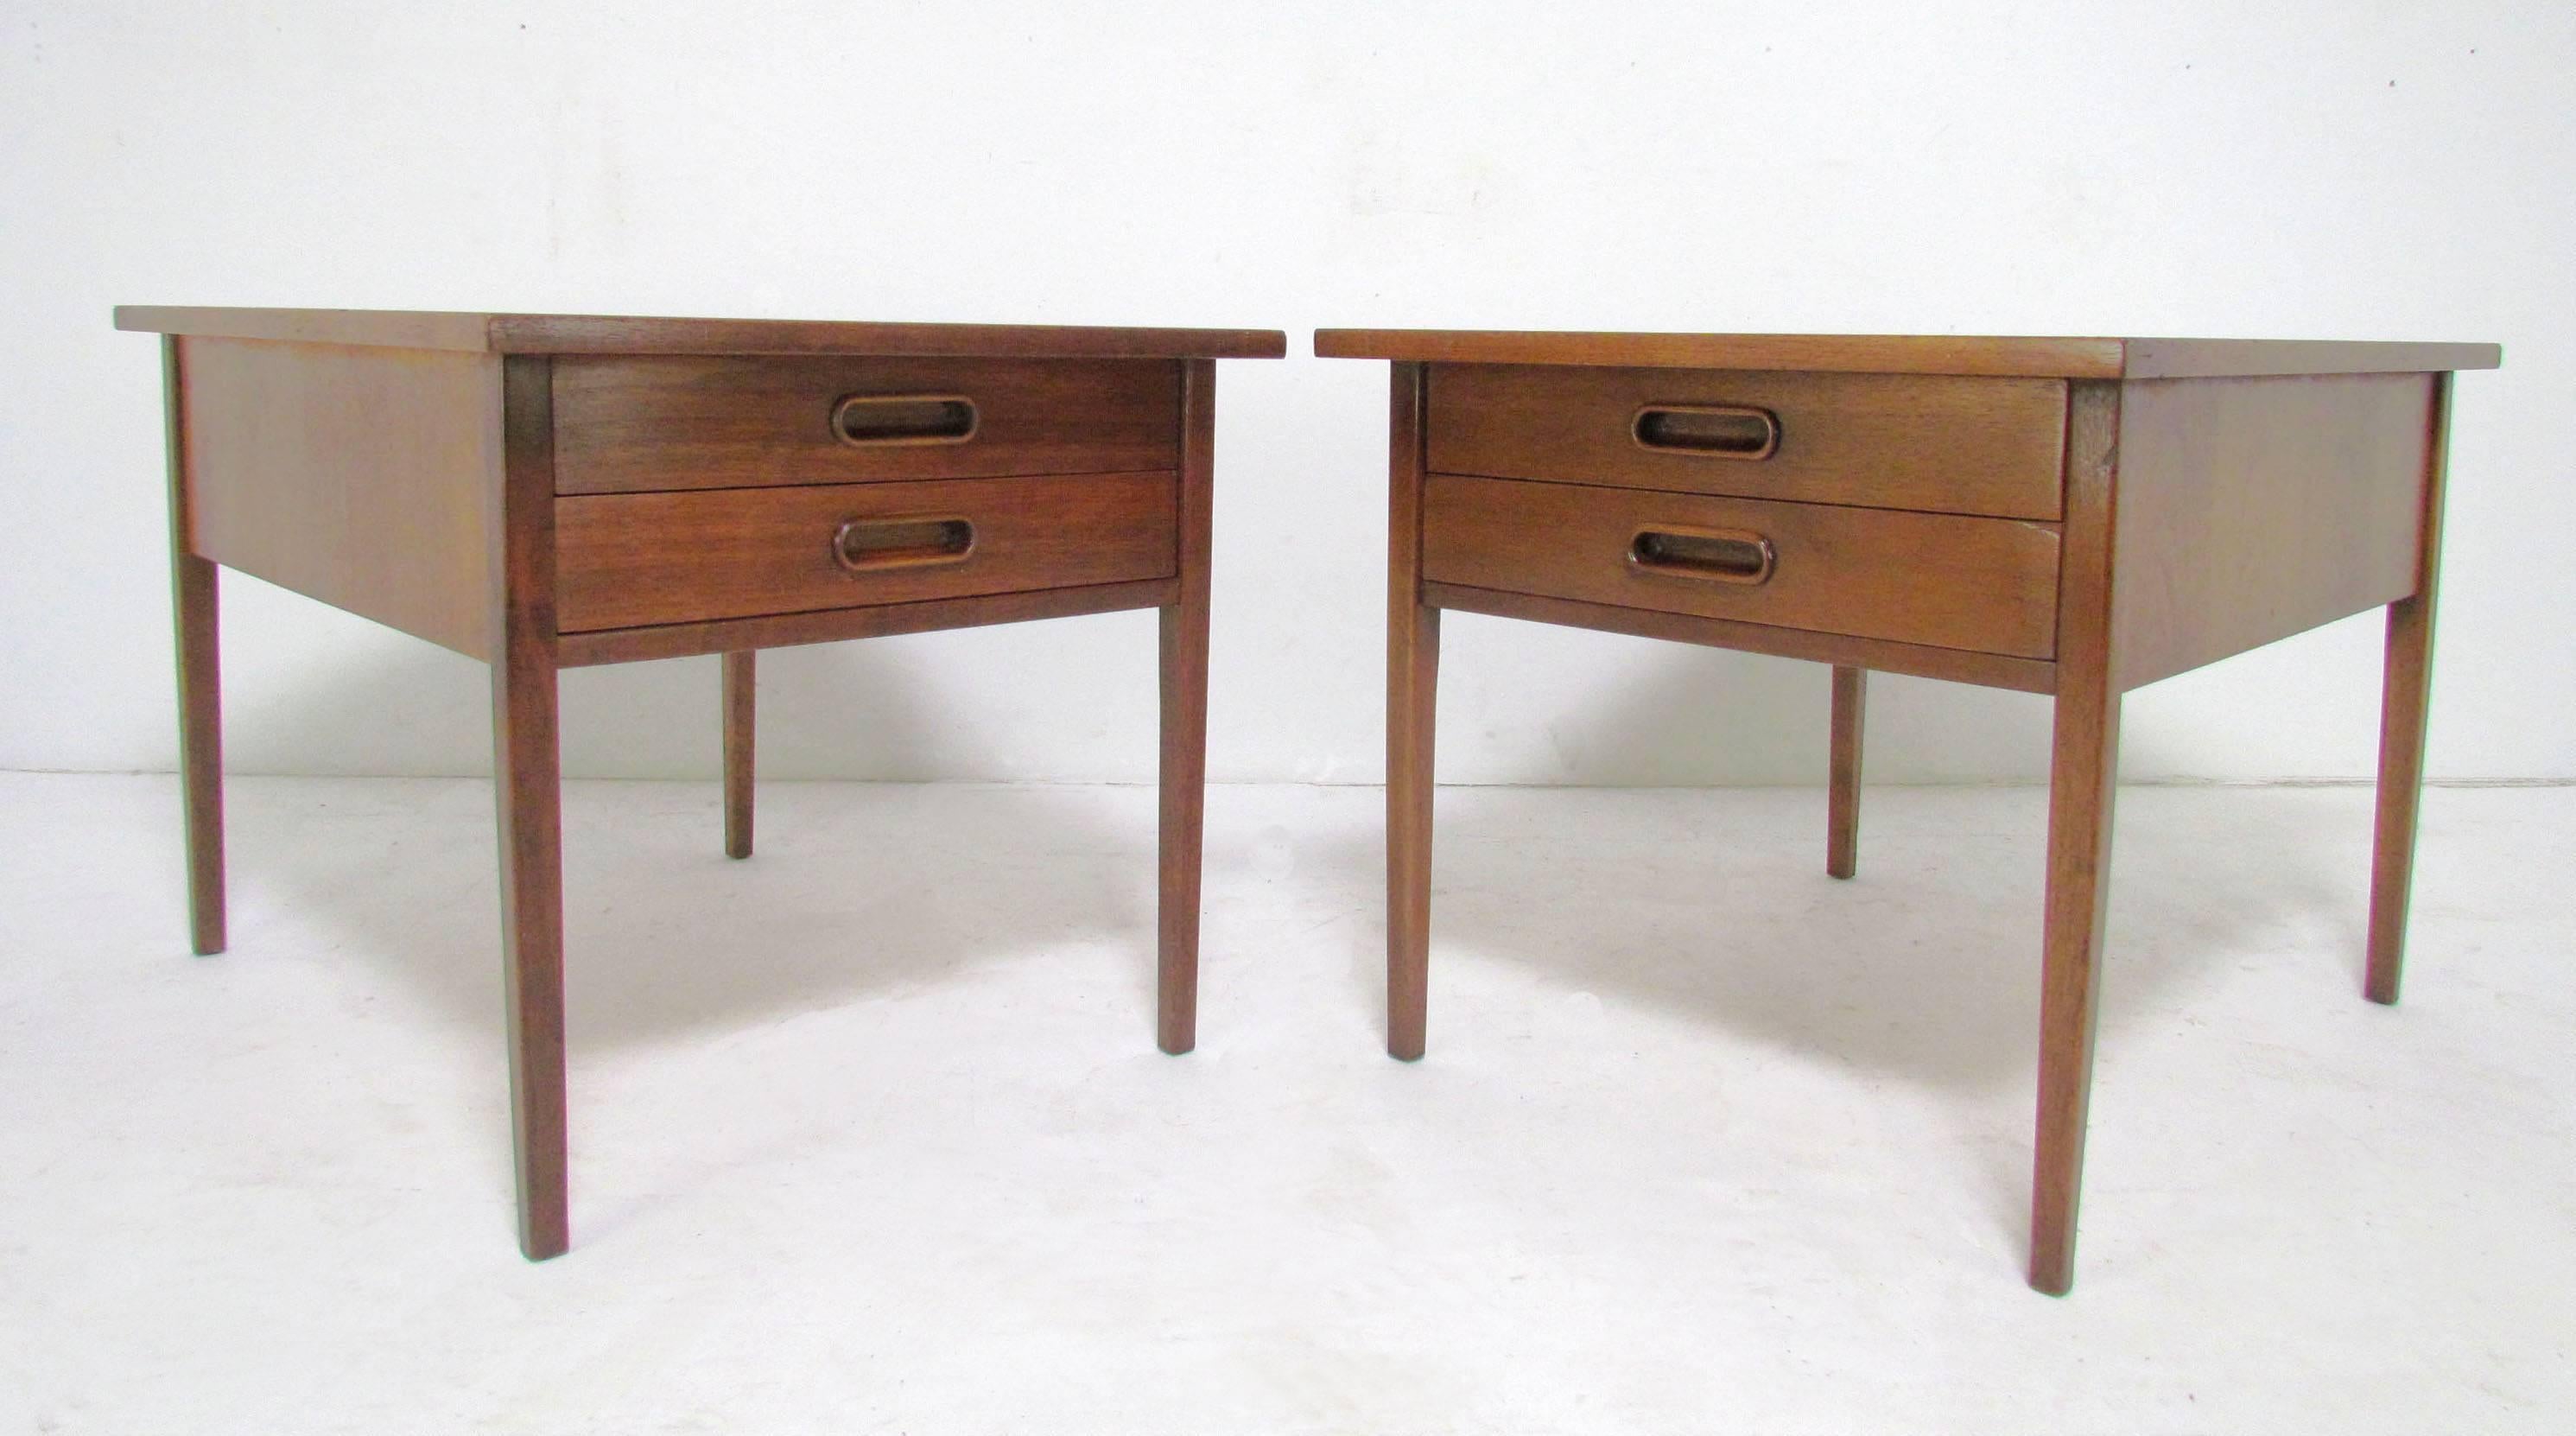 Pair of walnut and teak end tables, each with two drawers with carved pulls in the manner of Arne Vodder.